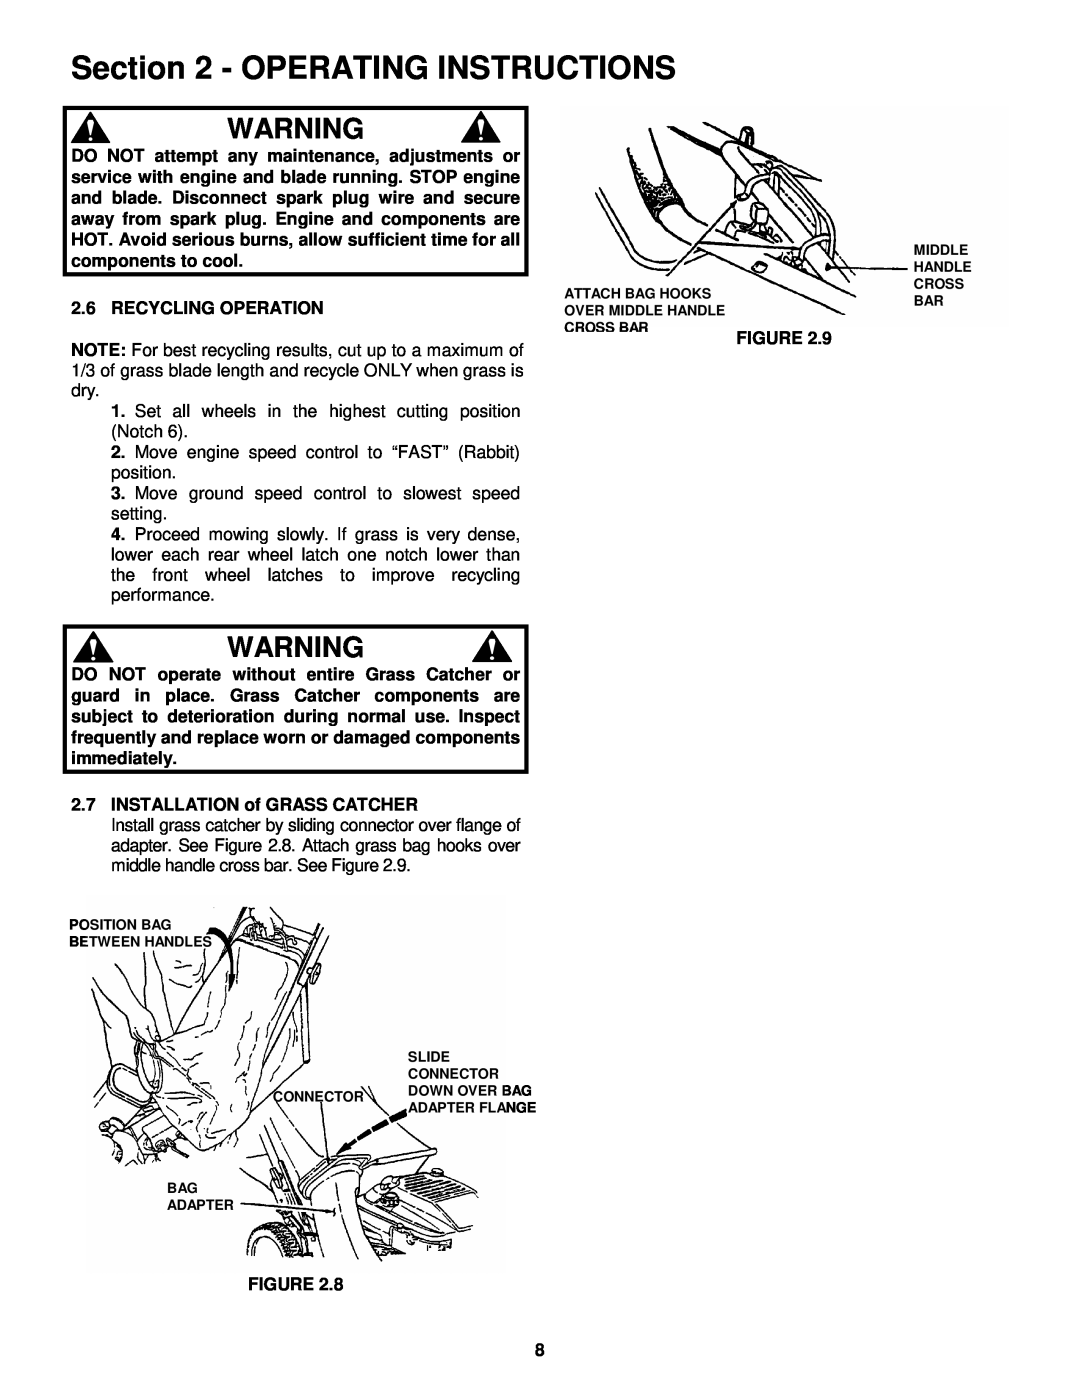 Snapper 215015 important safety instructions Operating Instructions, Recycling Operation 